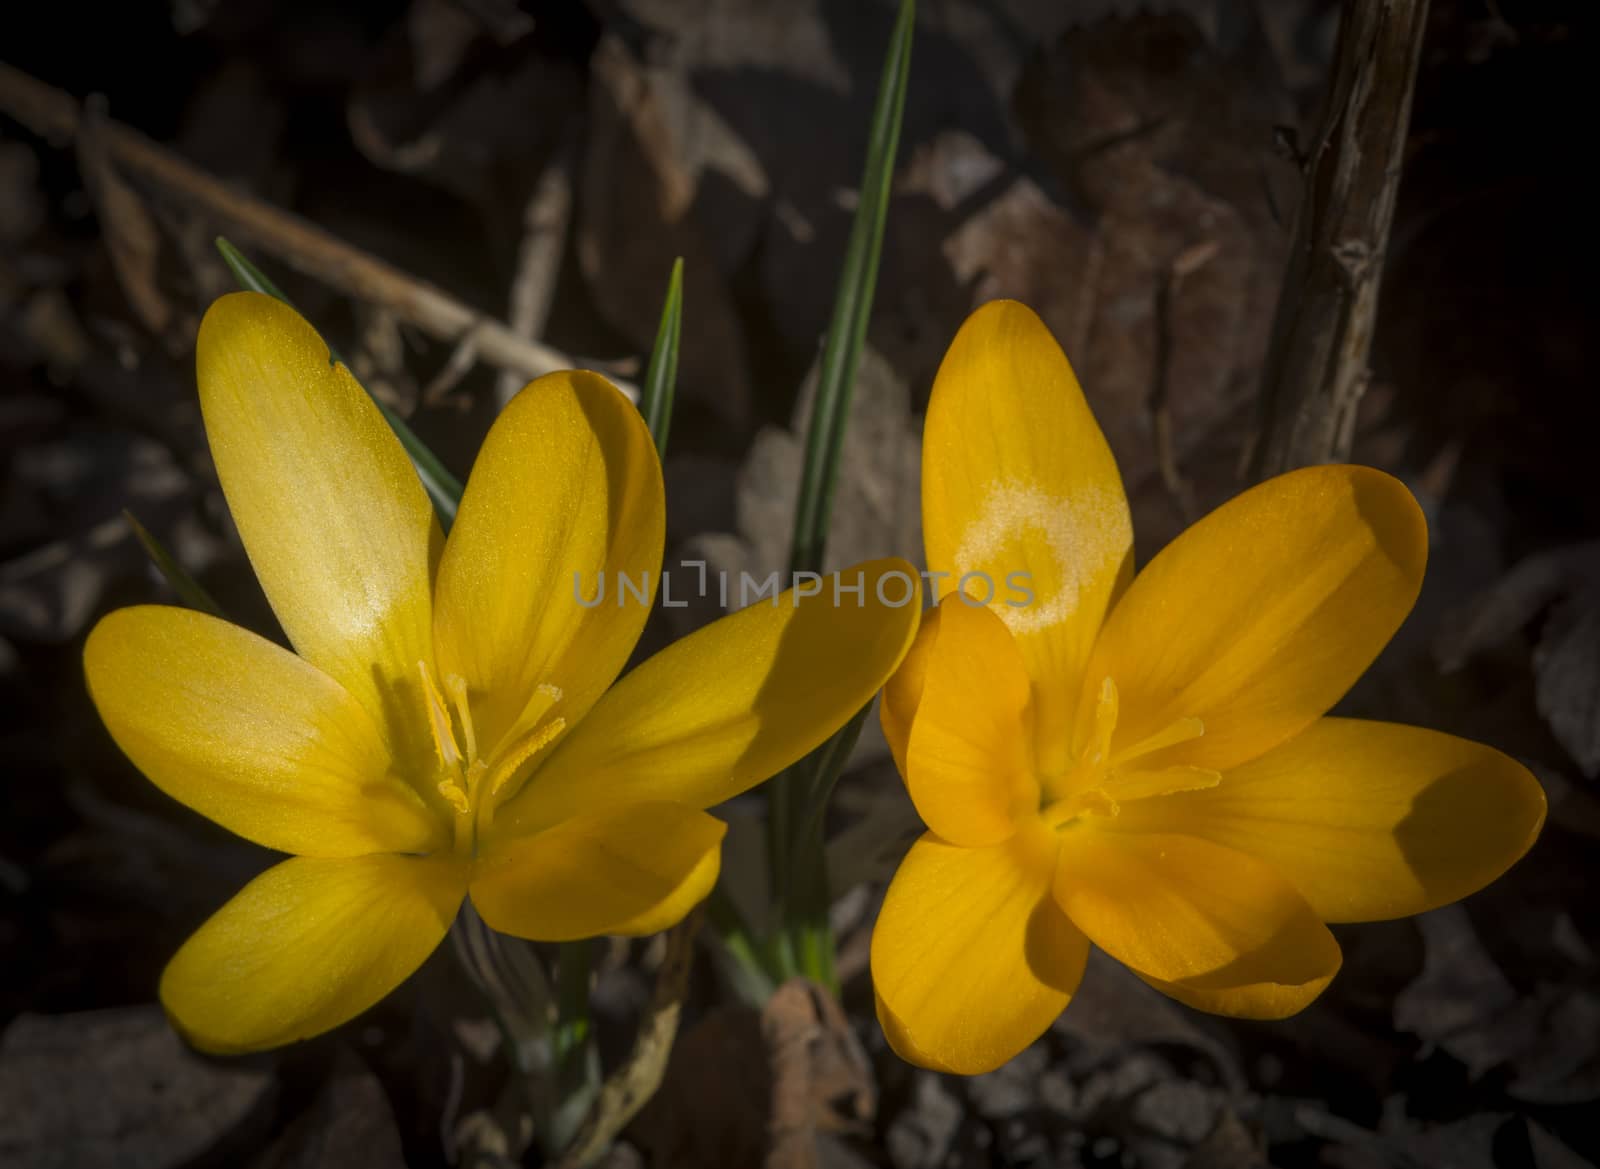 Two yellow crocus flowers outdoors in March, Stockholm, Sweden.